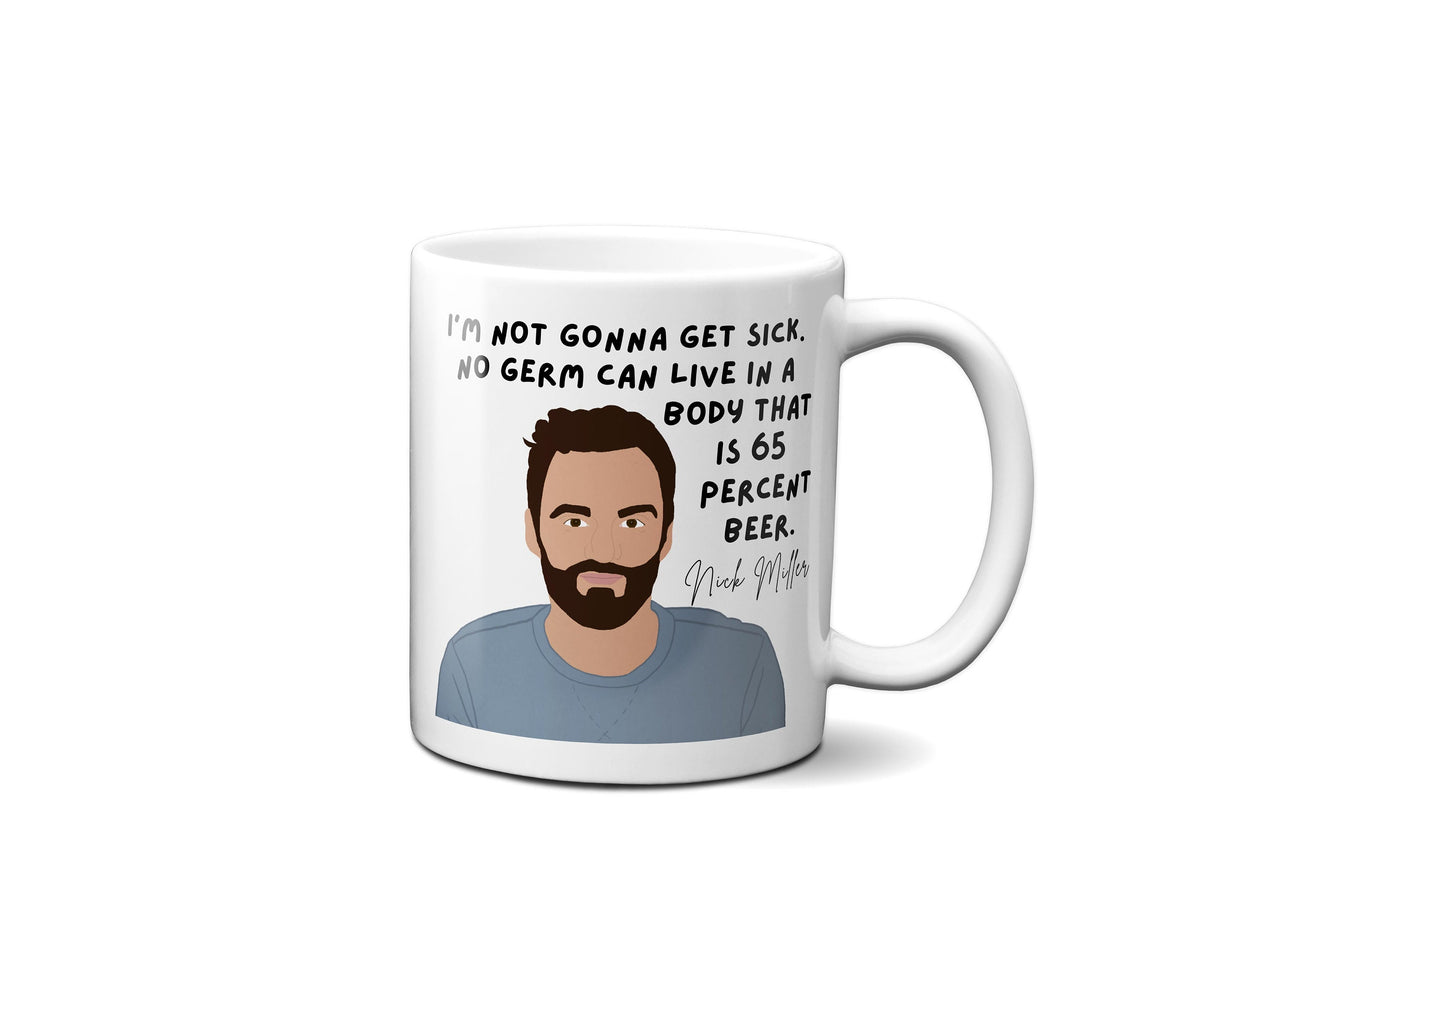 Nick Miller Mug | Nick Miller Quotes | New Girl Mug | No germ can live in a body that's 65 percent beer